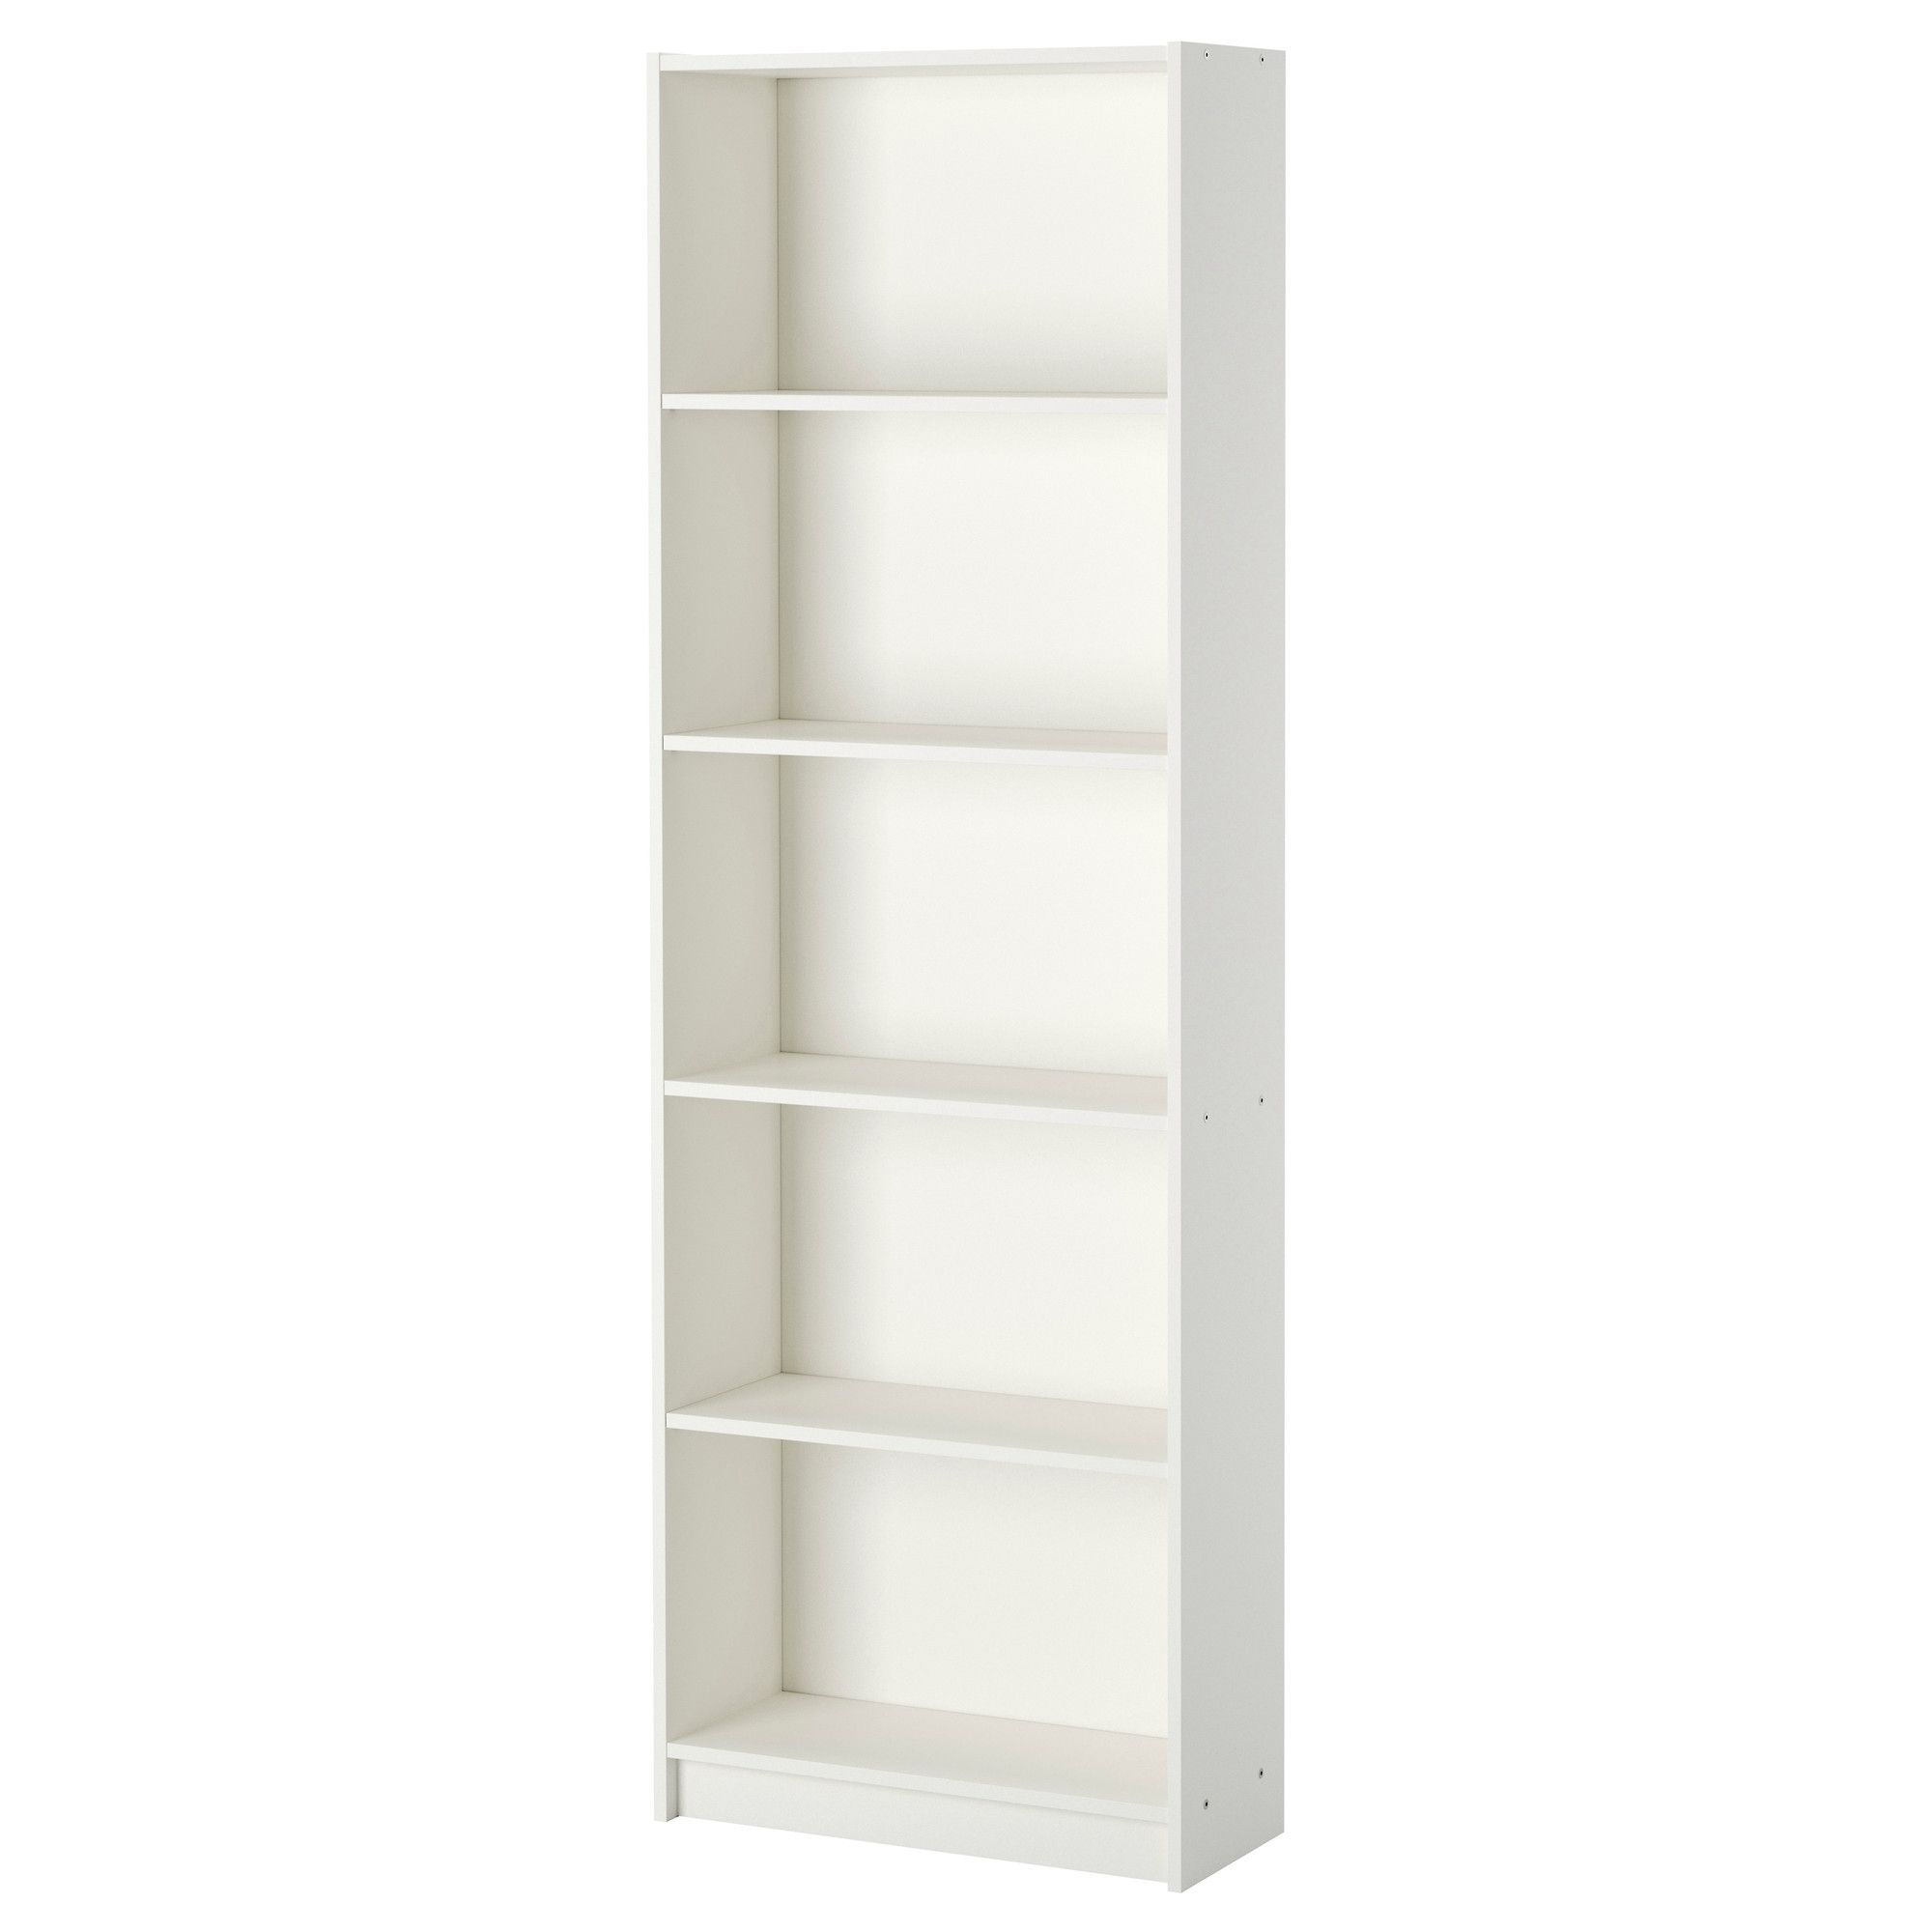 Awesome 8 Inch Bookcase 27 For Your Beech Bookcases With 8 Inch Intended For Beech Bookcases (View 13 of 15)